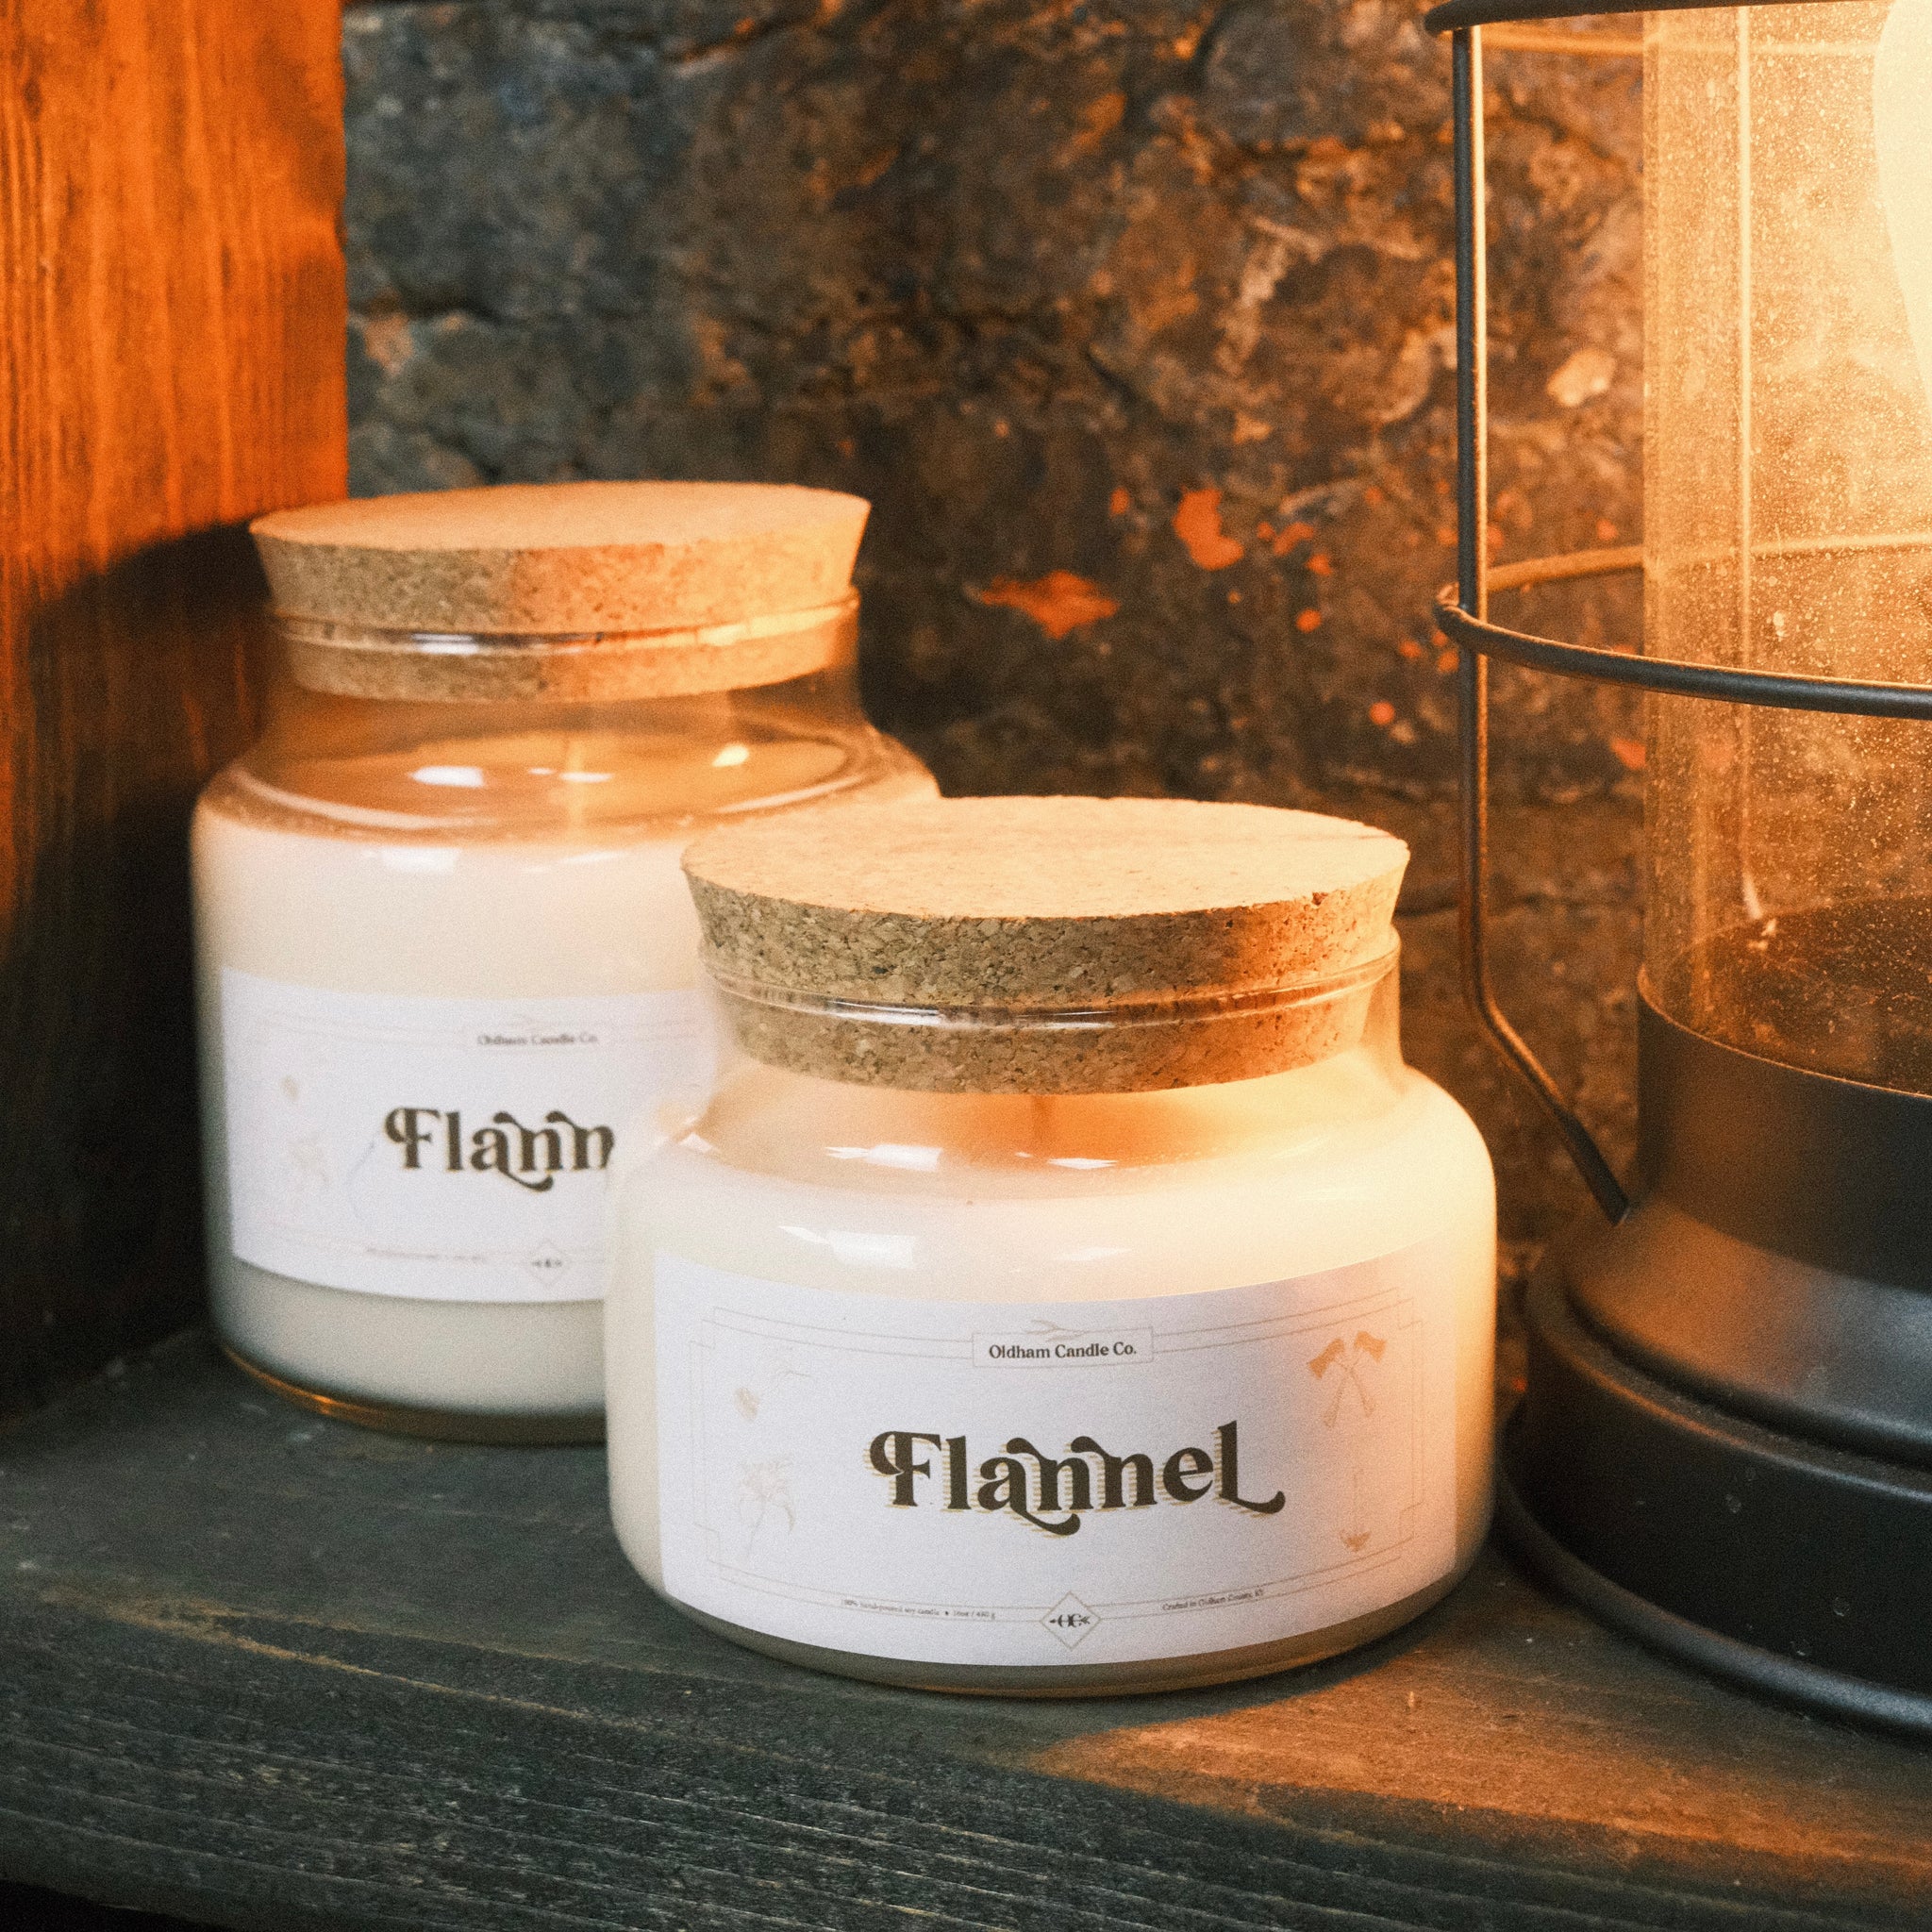 Flannel Scented Candle